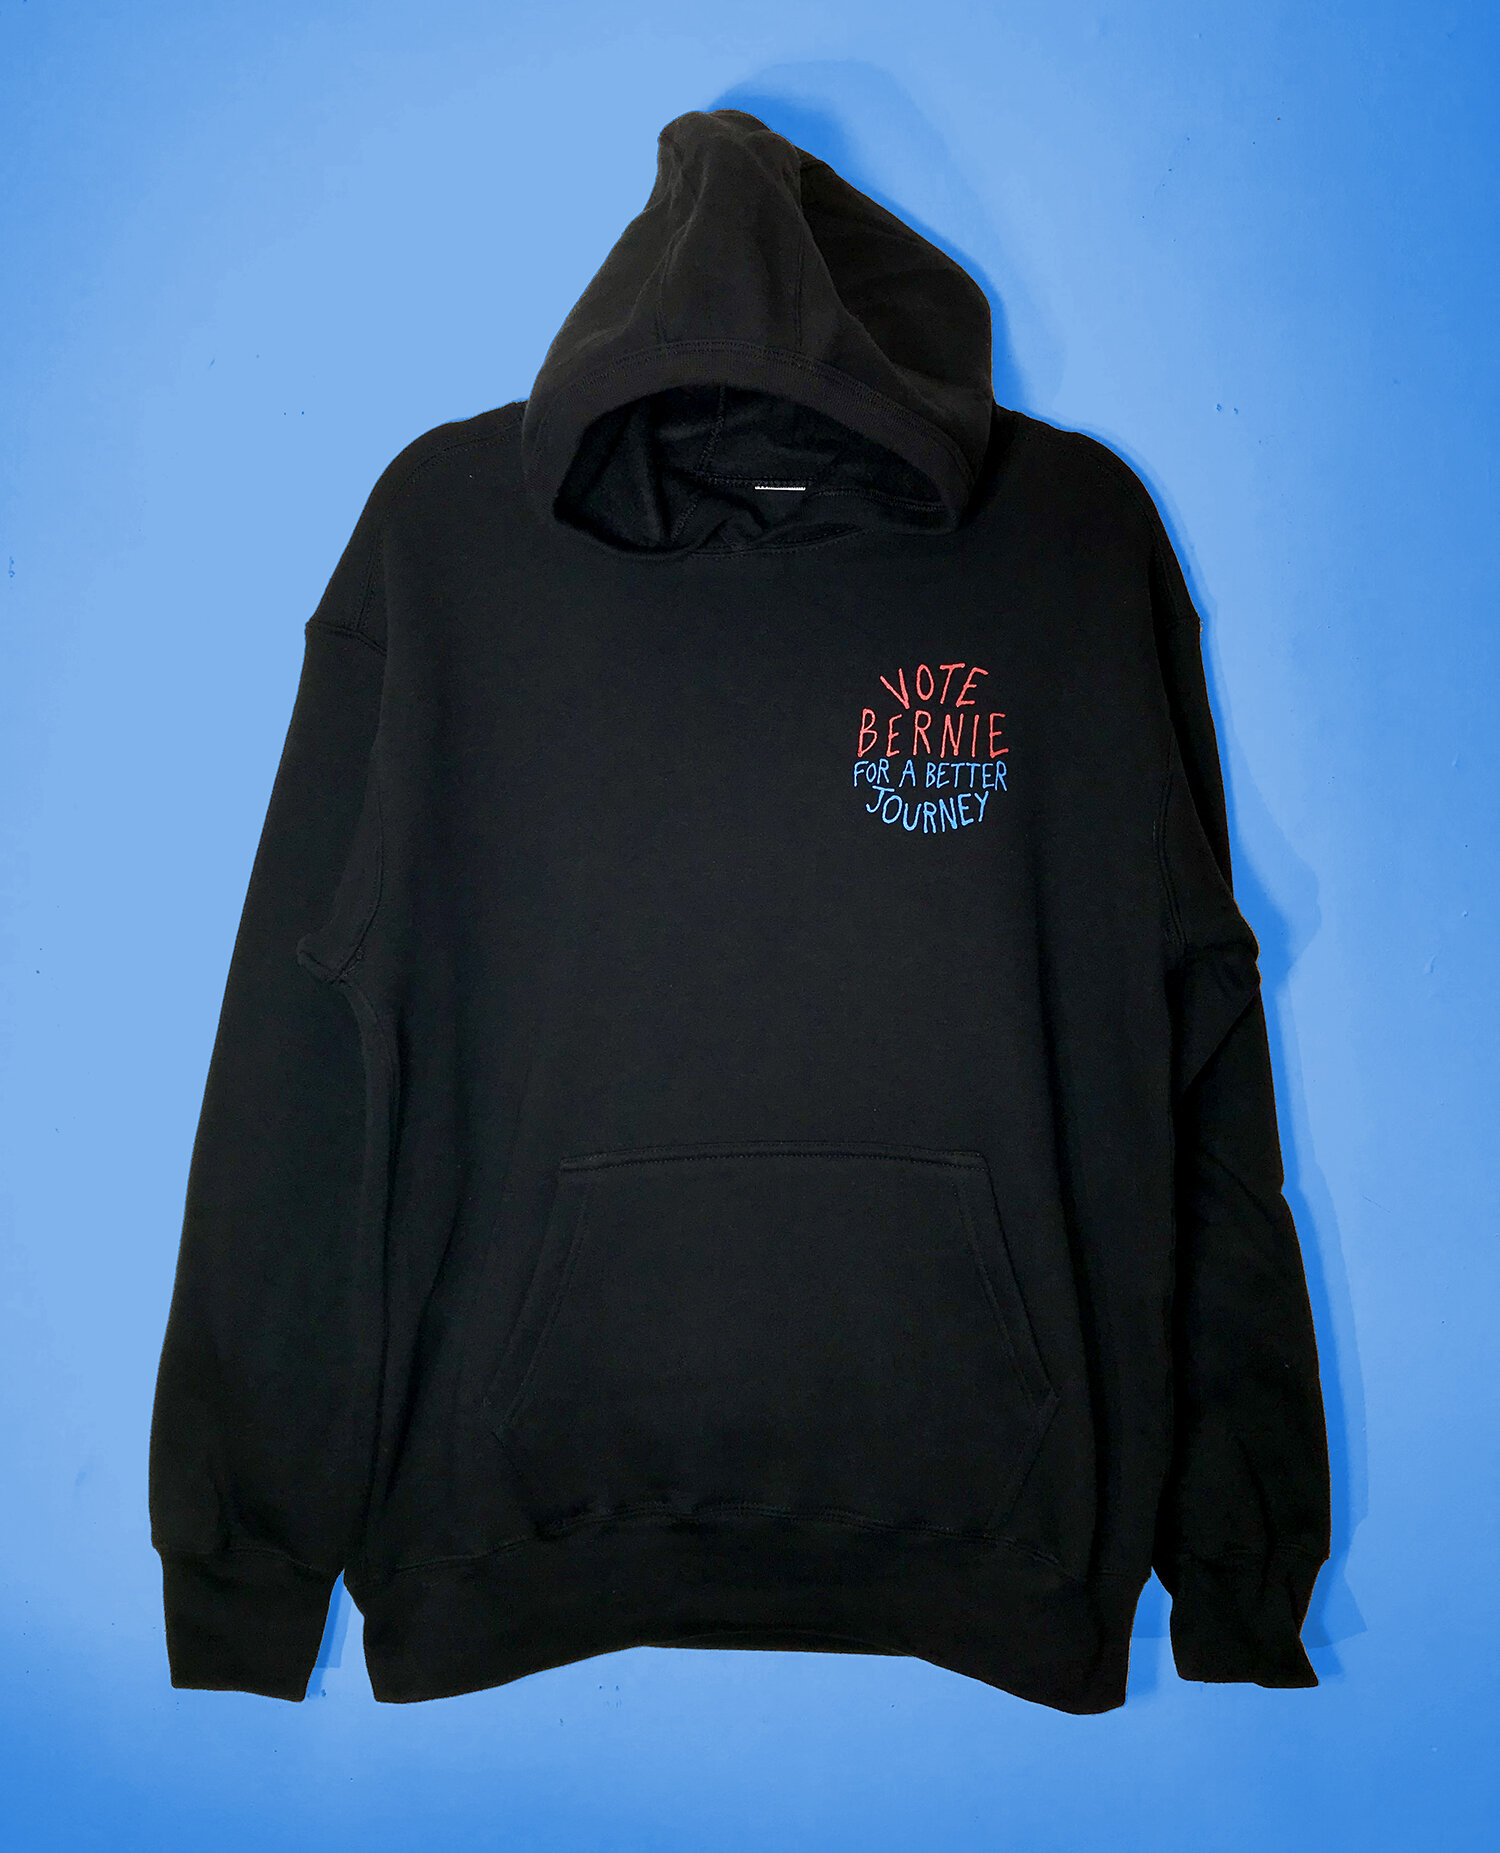 Election Reform! 1of1 Hoodie